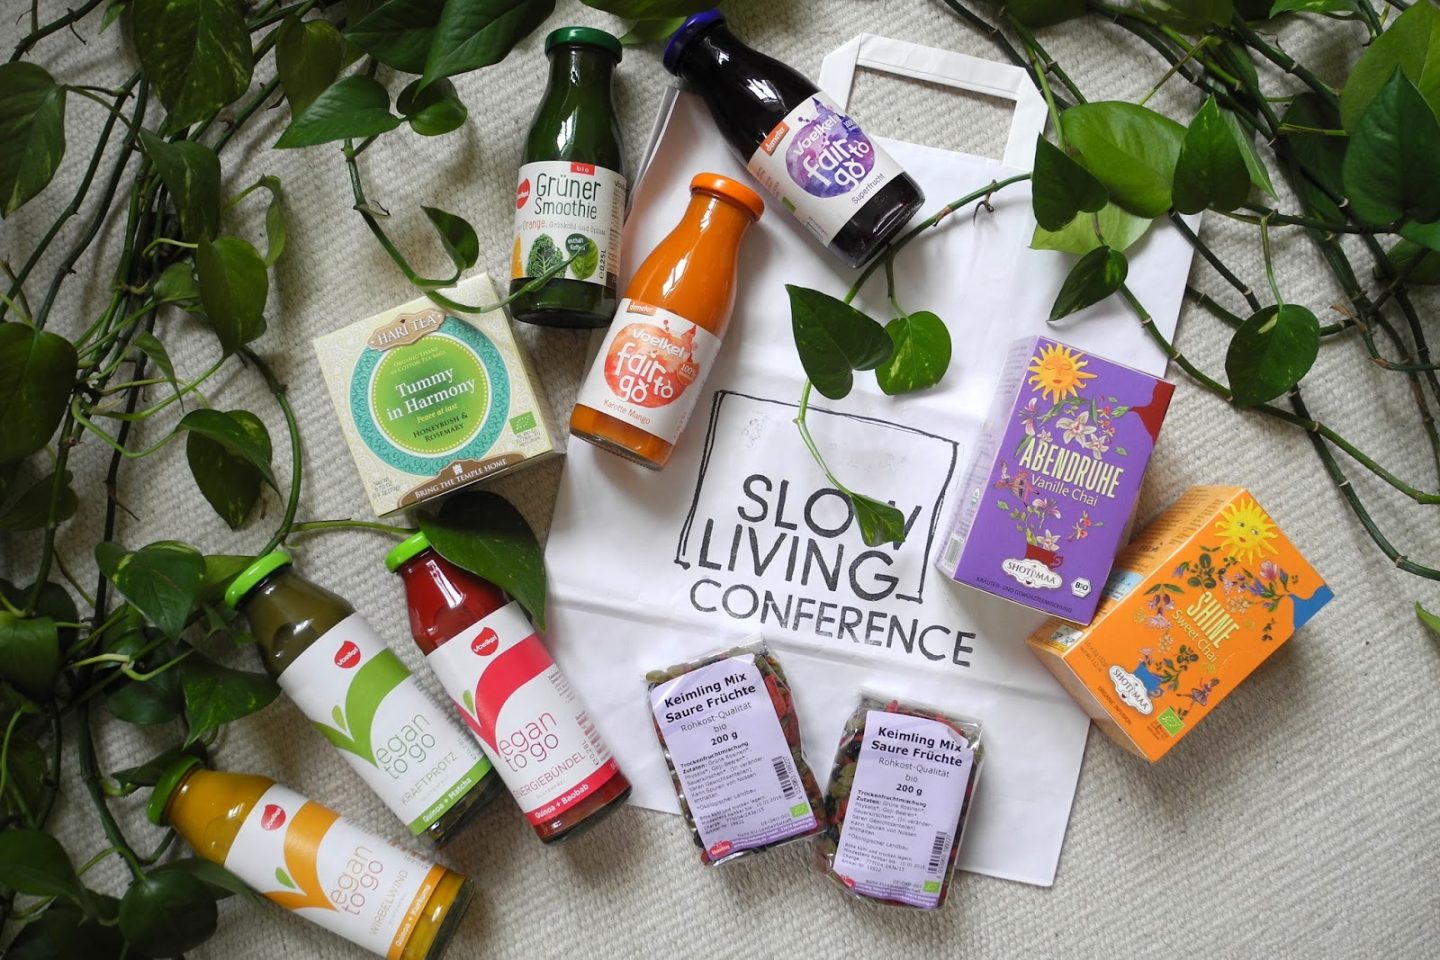 Slow Living Conference – Goodies and new Friends